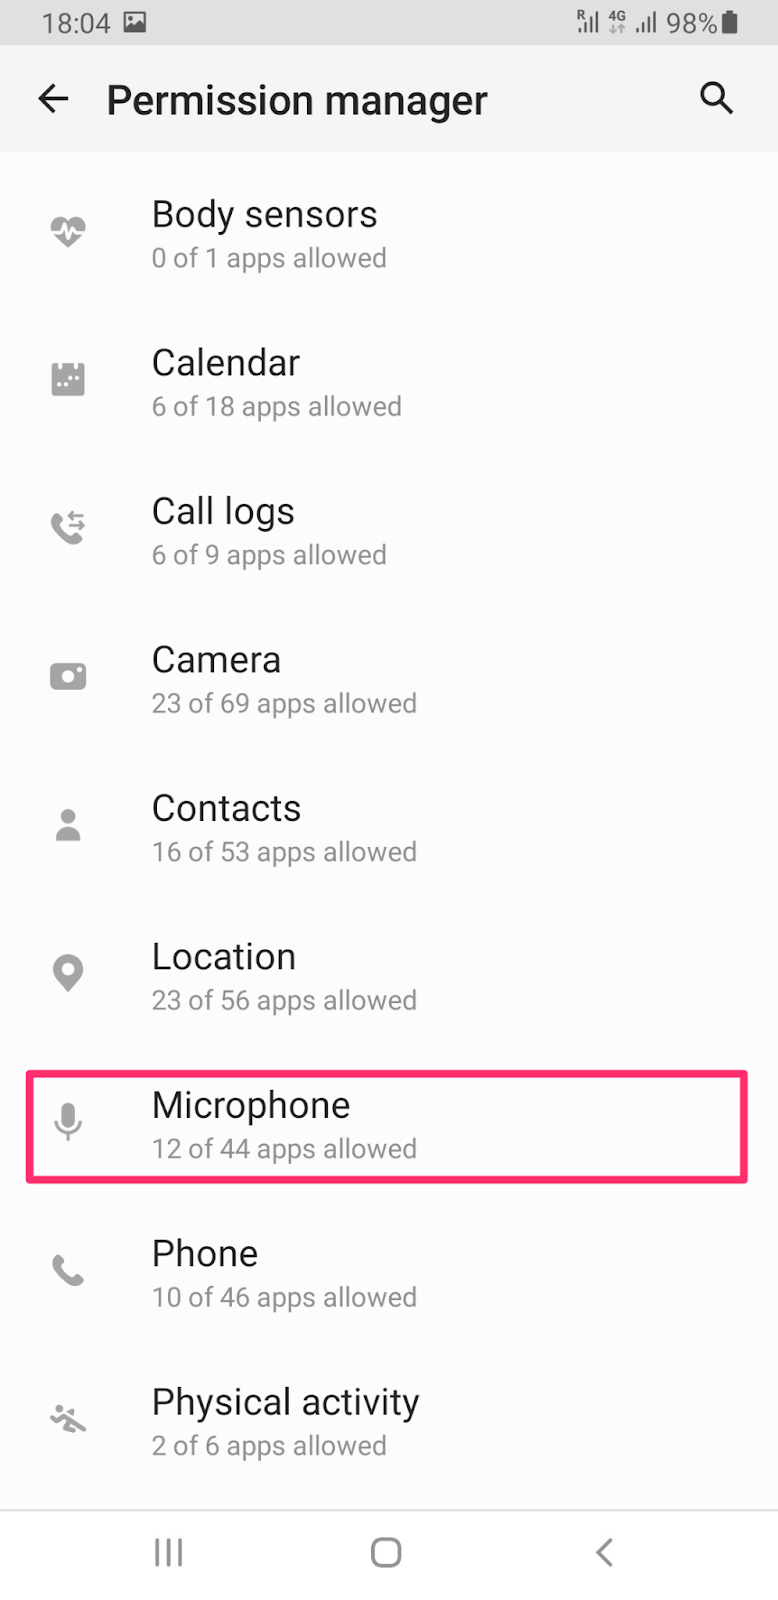 Select "Microphone"